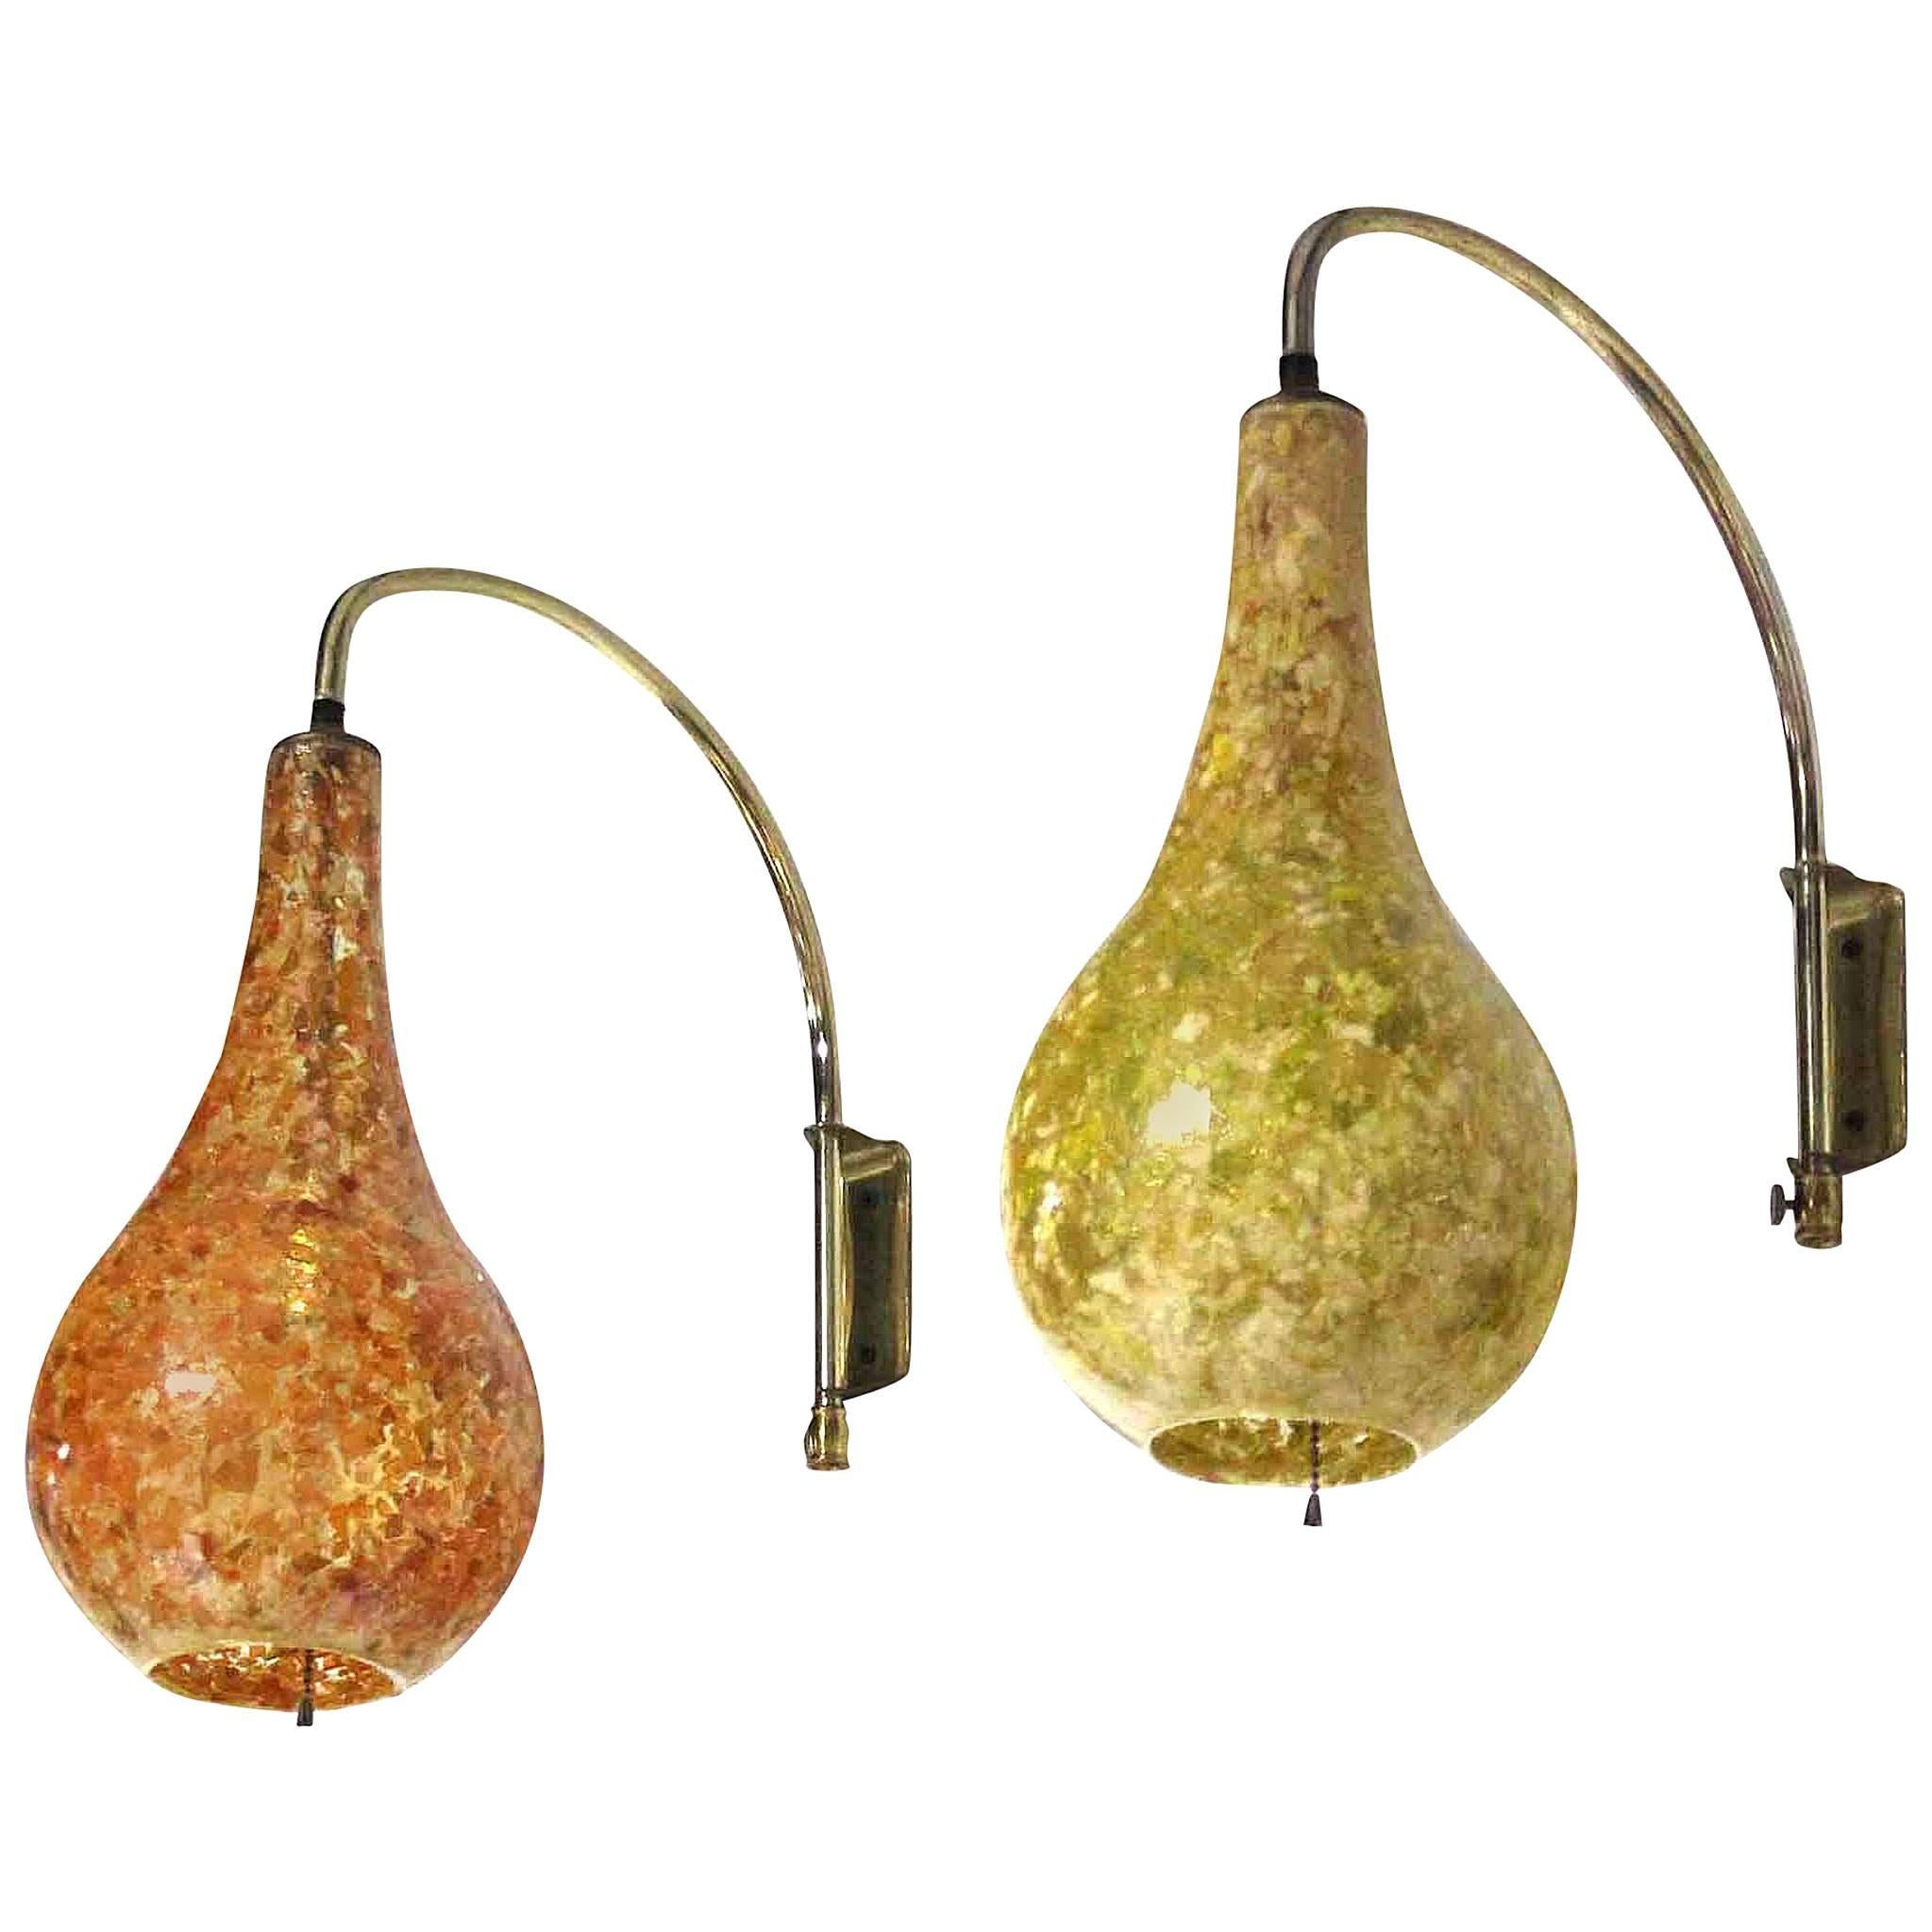 Pair of Mid-Century Modern Pear Shaped Sconces For Sale